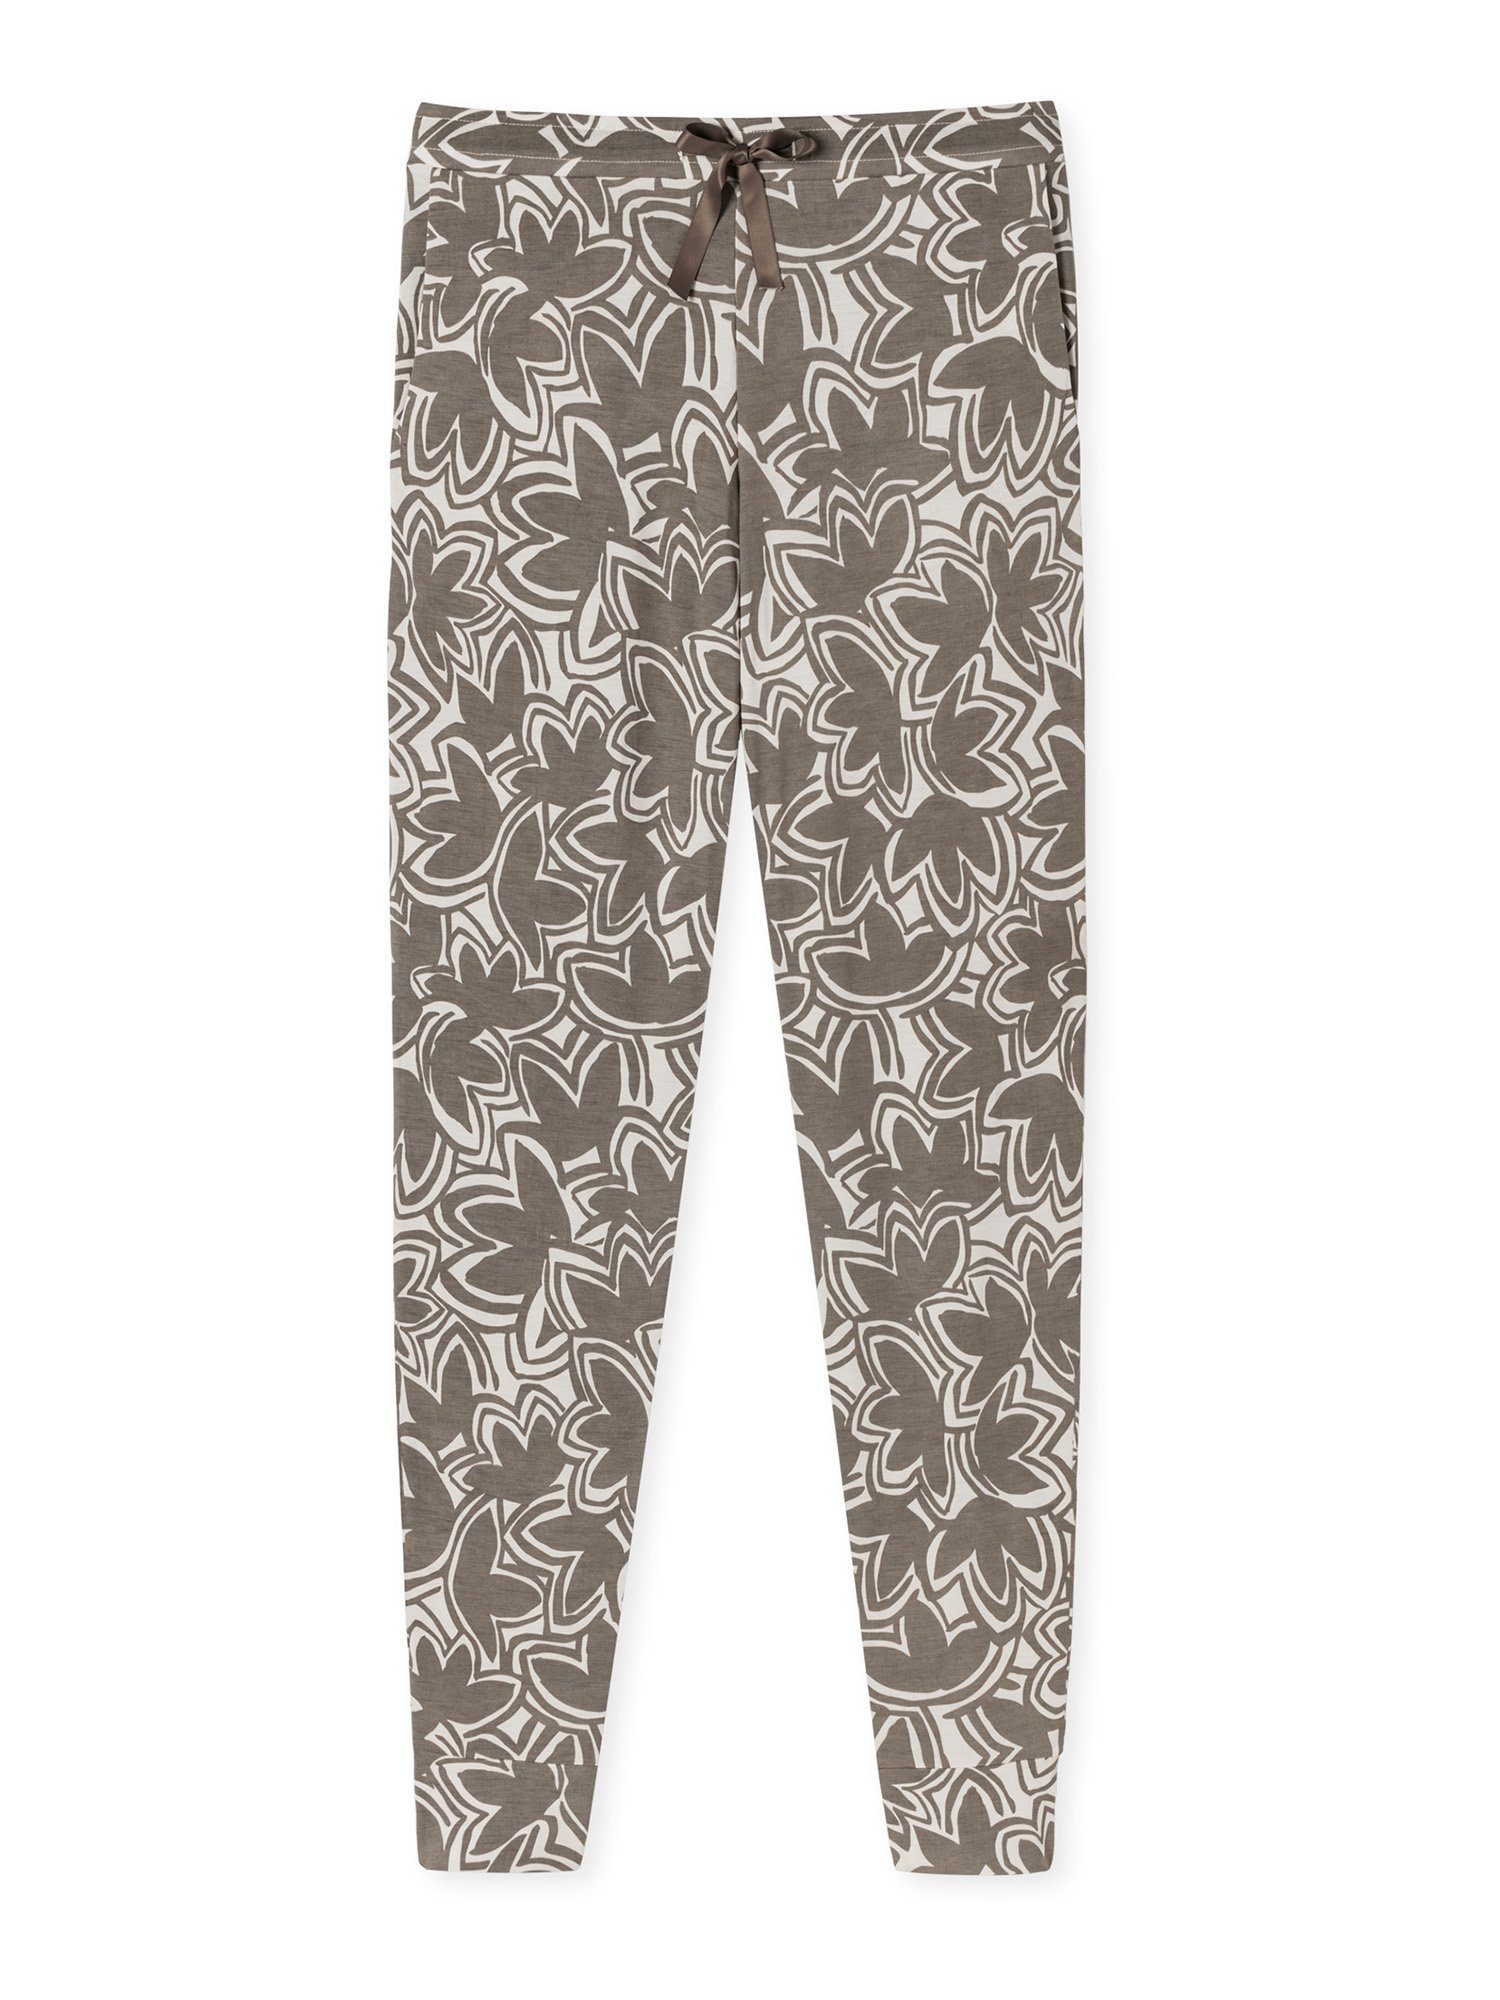 95/5 Pyjamahose schlaf-hose schlaf-hose pyjama Schiesser taupe